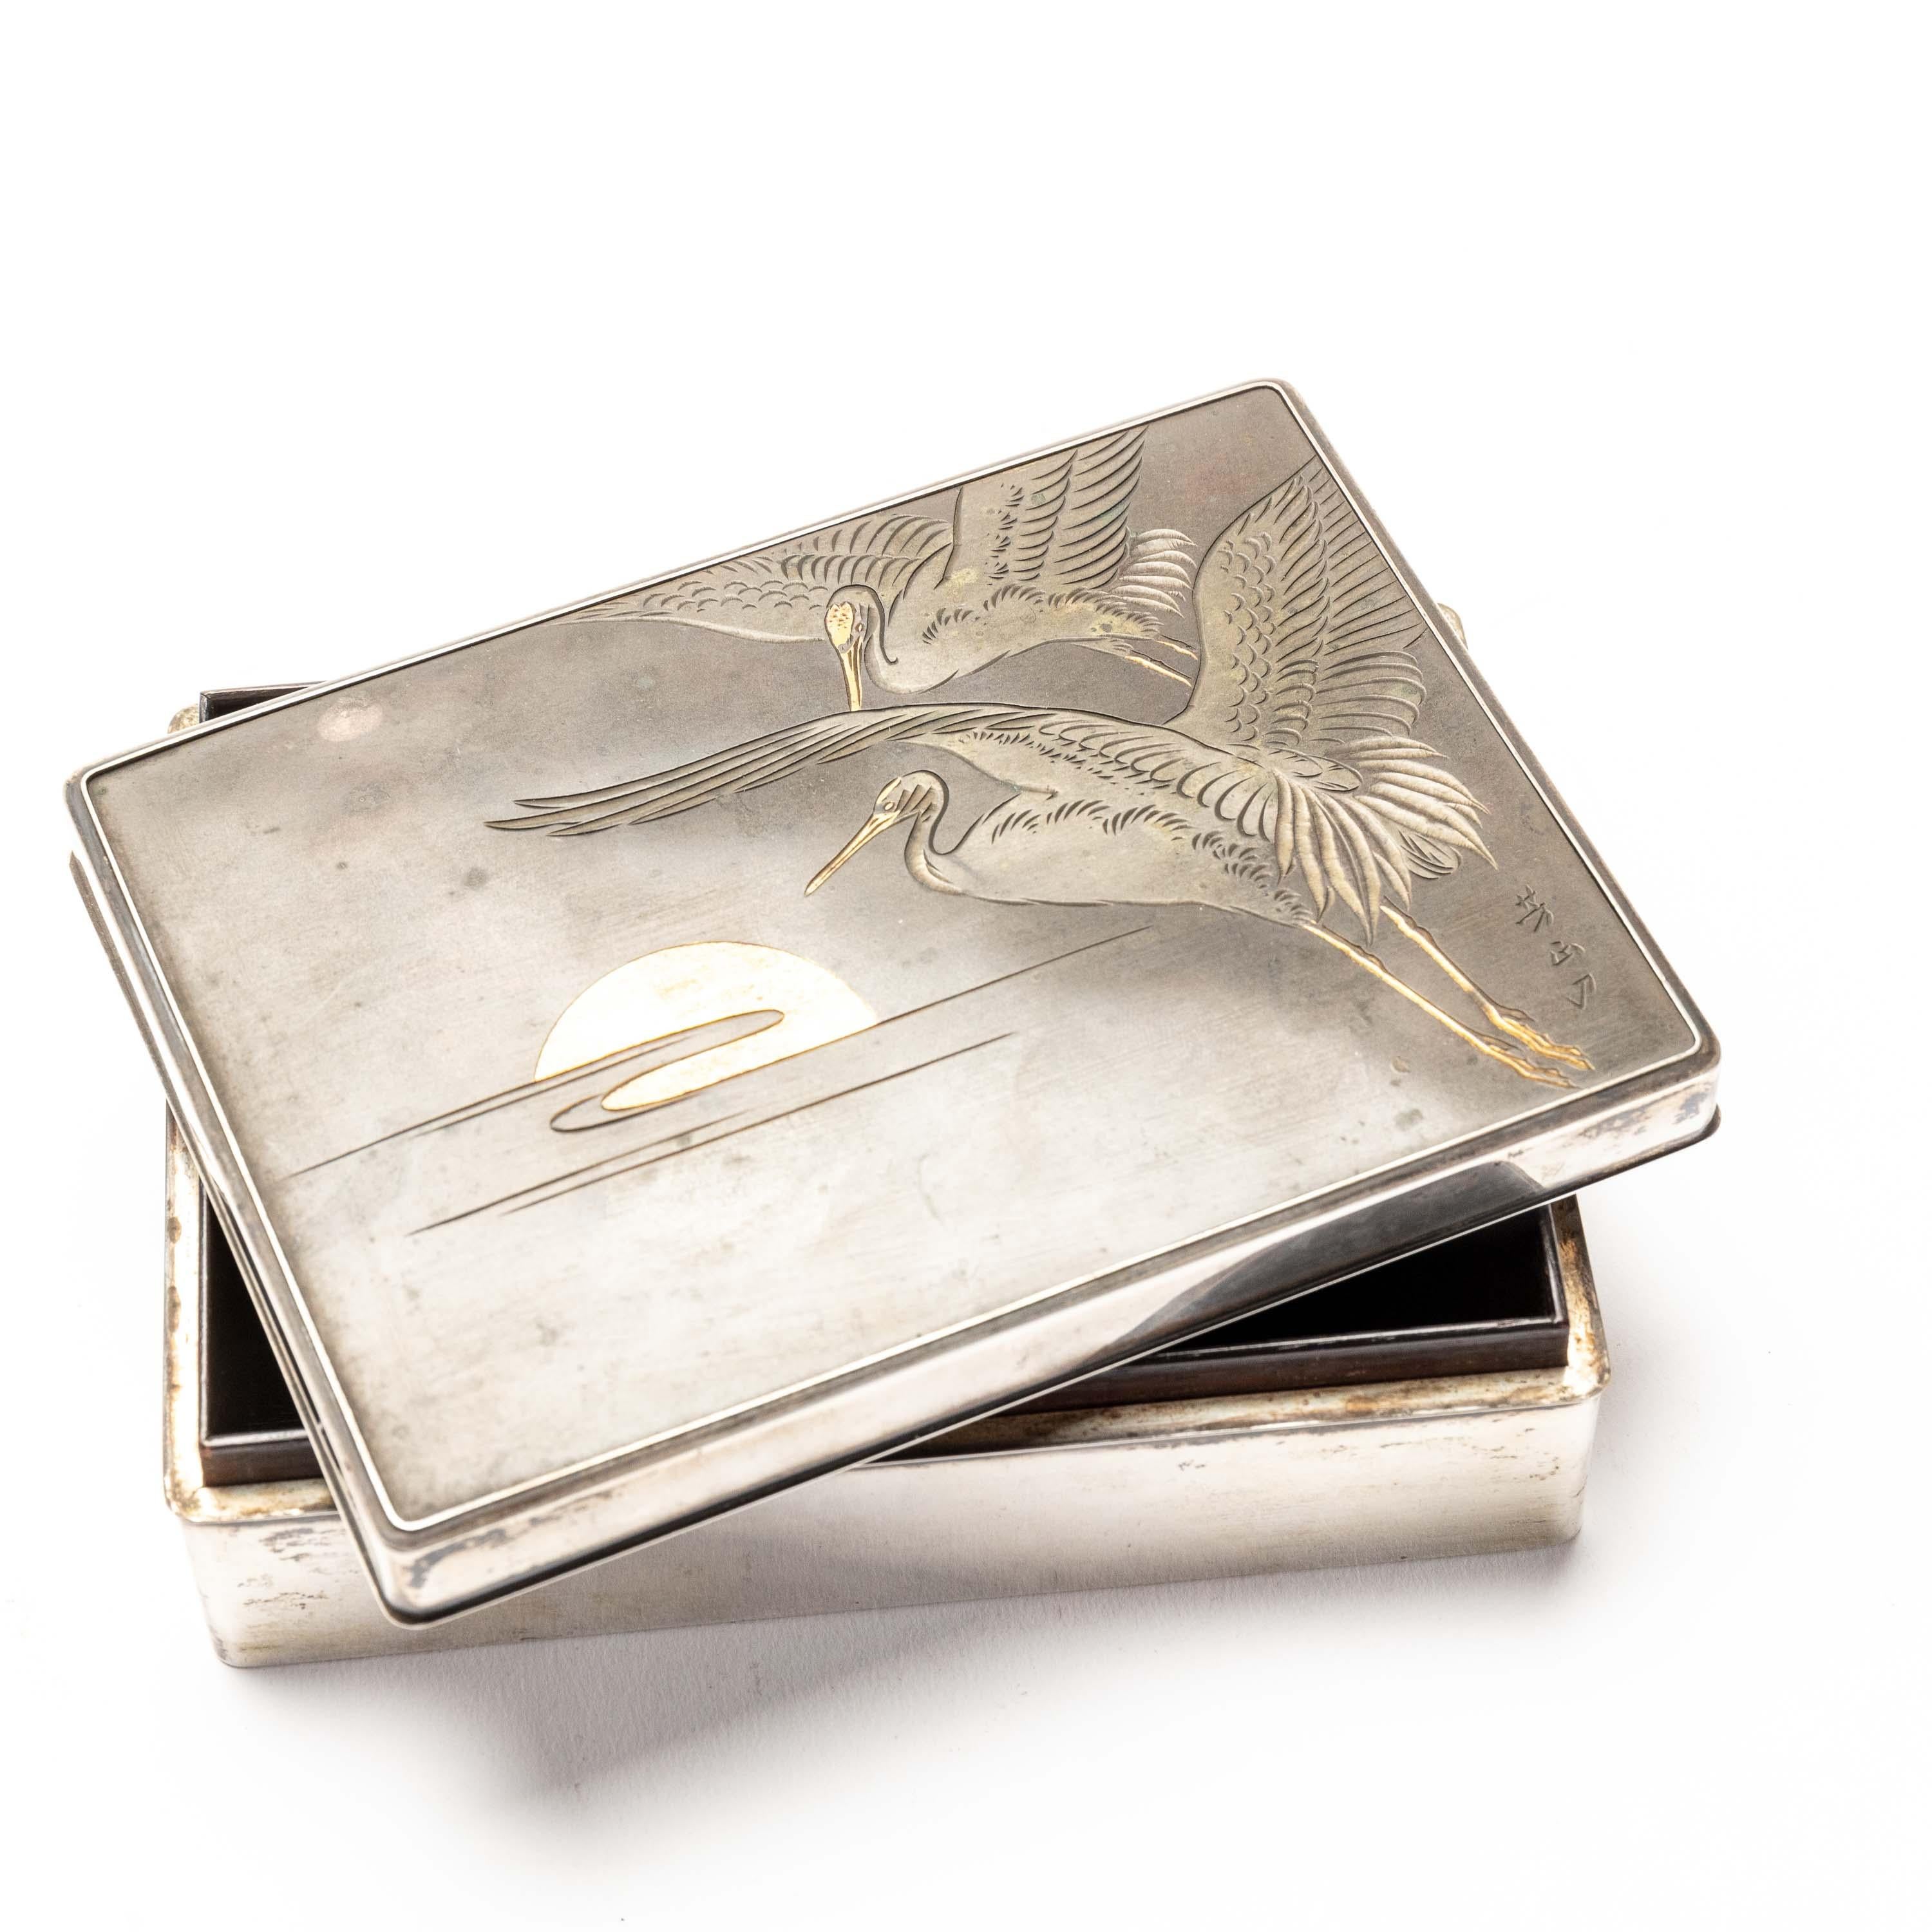 Japanese Silver Cigarette Box with Incised Cranes from Japan